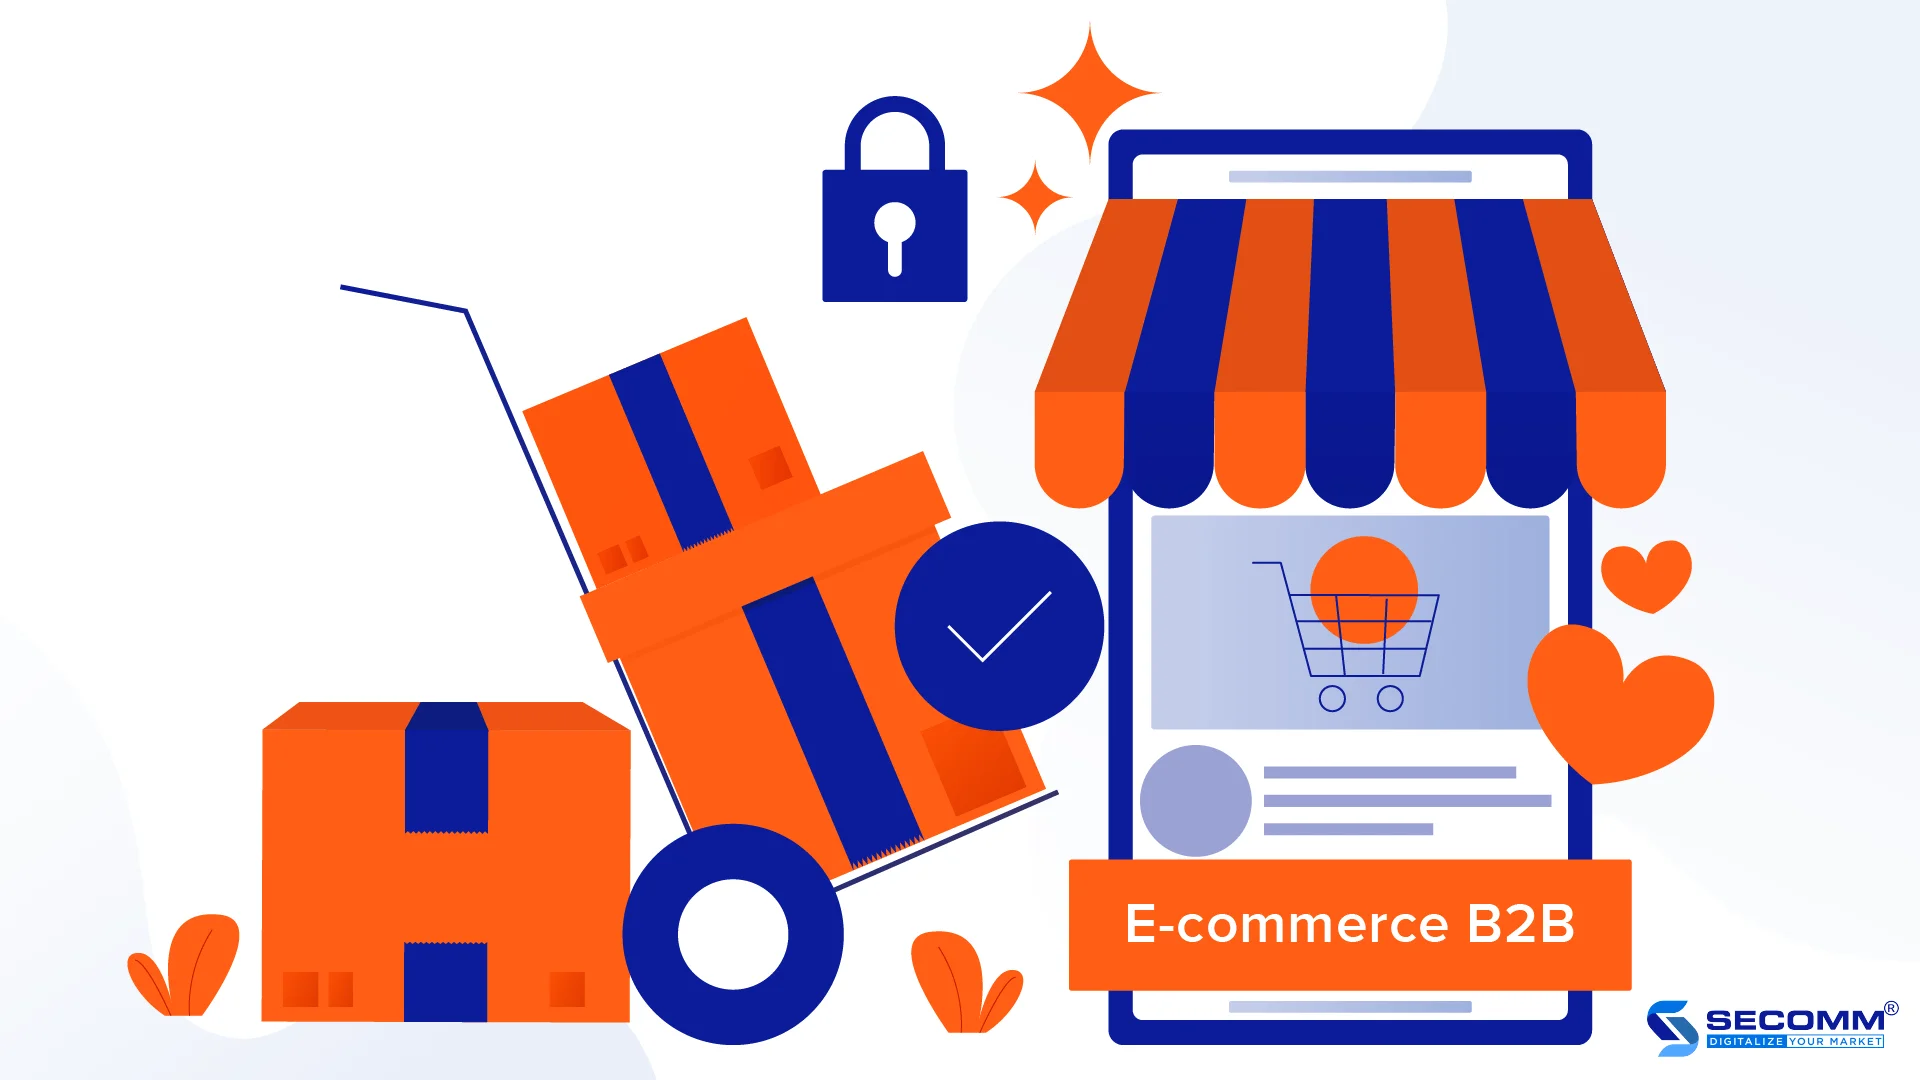 Reasons why B2B ecommerce should become a must-do trend